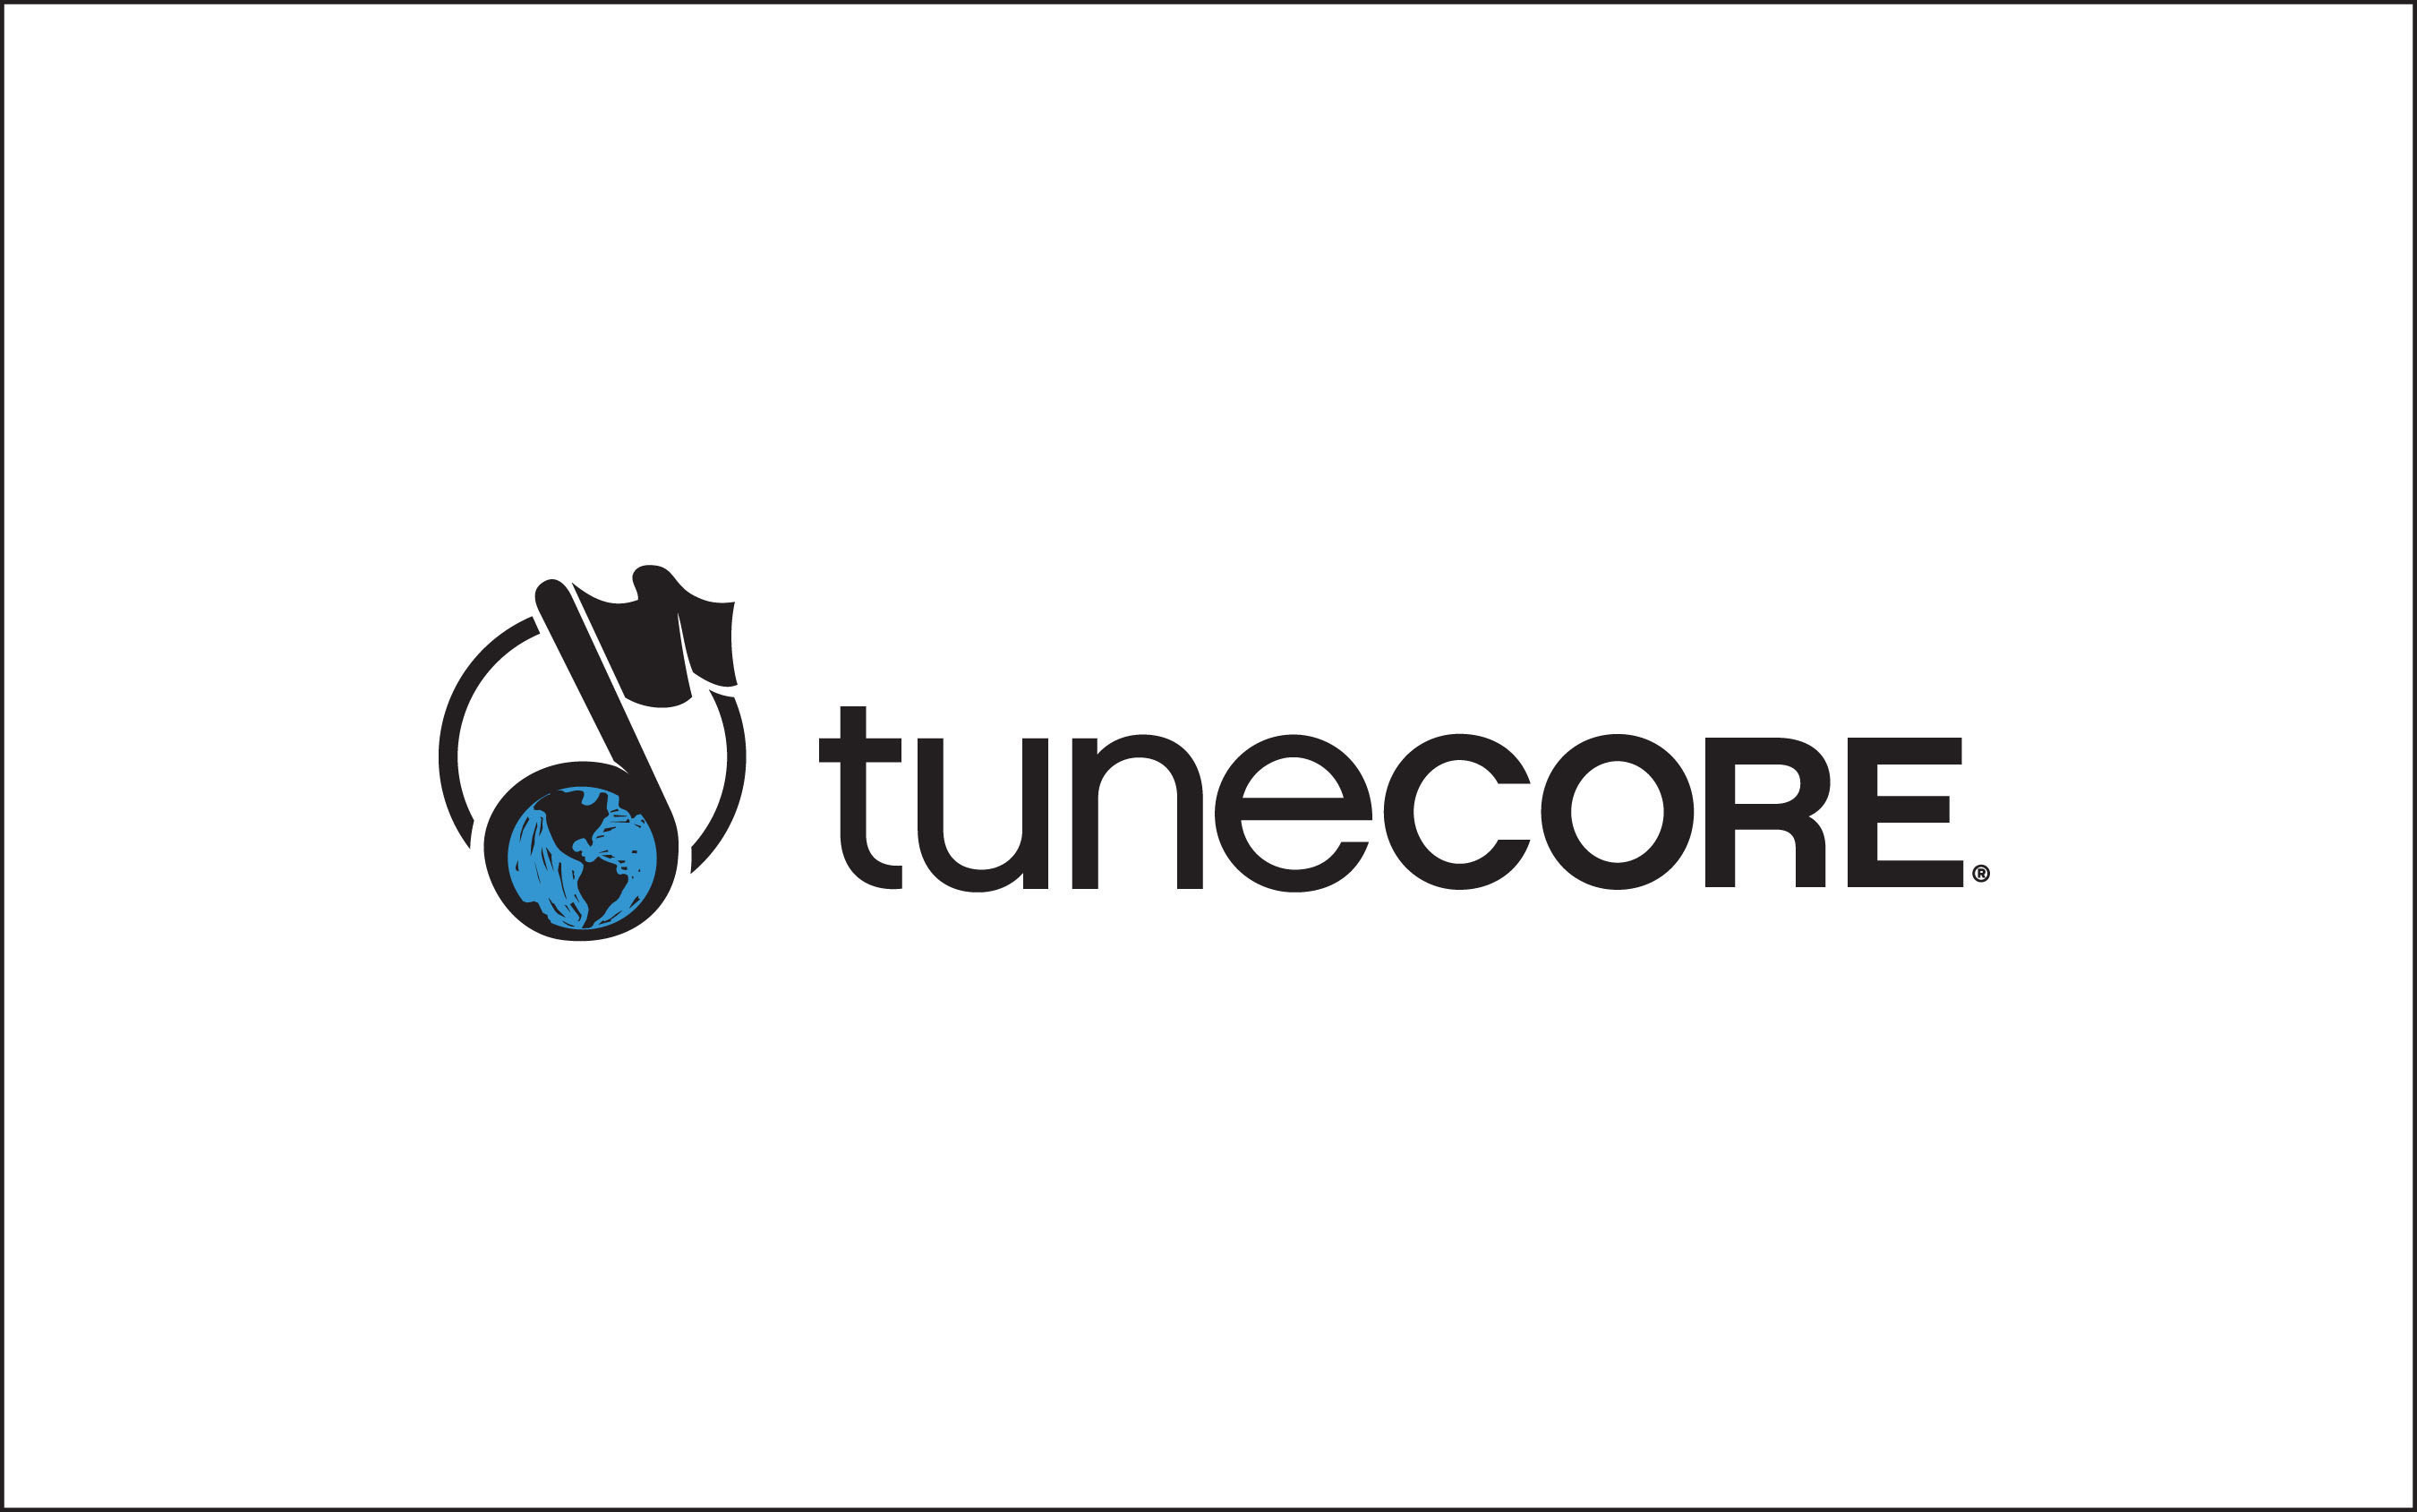 TuneCore brings more music to more people, while helping musicians and songwriters increase money-earning opportunities and take charge of their own careers. The company has one of the highest artist revenue-generating music catalogs in the world, earning TuneCore Artists $438.8 million on 8.8 billion streams and downloads since inception. TuneCore Music Distribution helps artists, labels and managers sell their music through iTunes, Amazon MP3, Spotify and other major download and streaming sites...